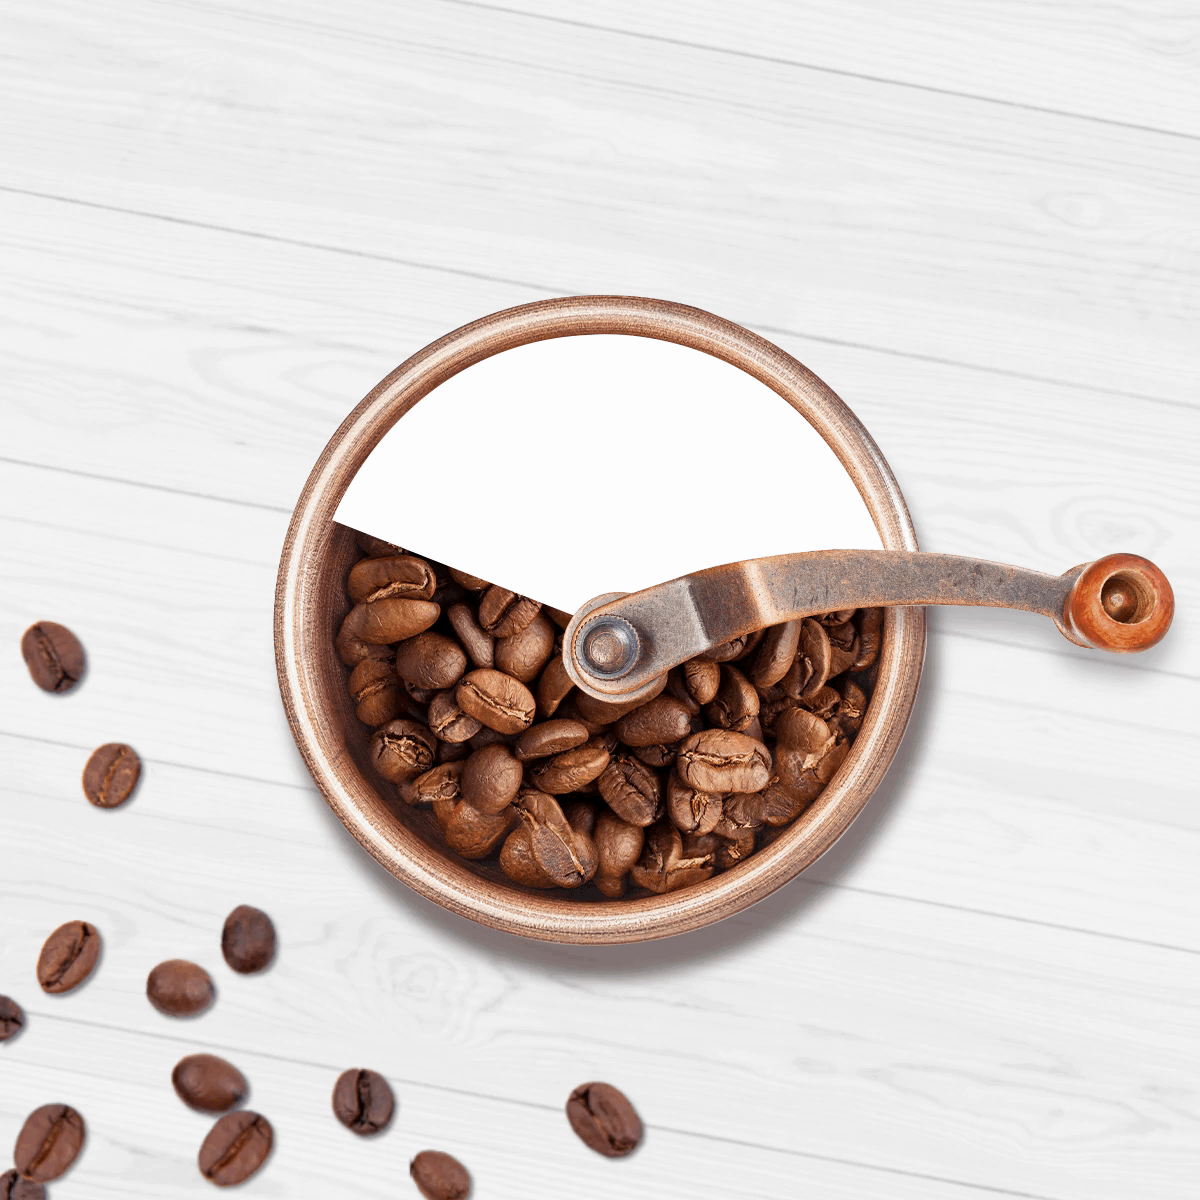 no time to grind your own coffee?